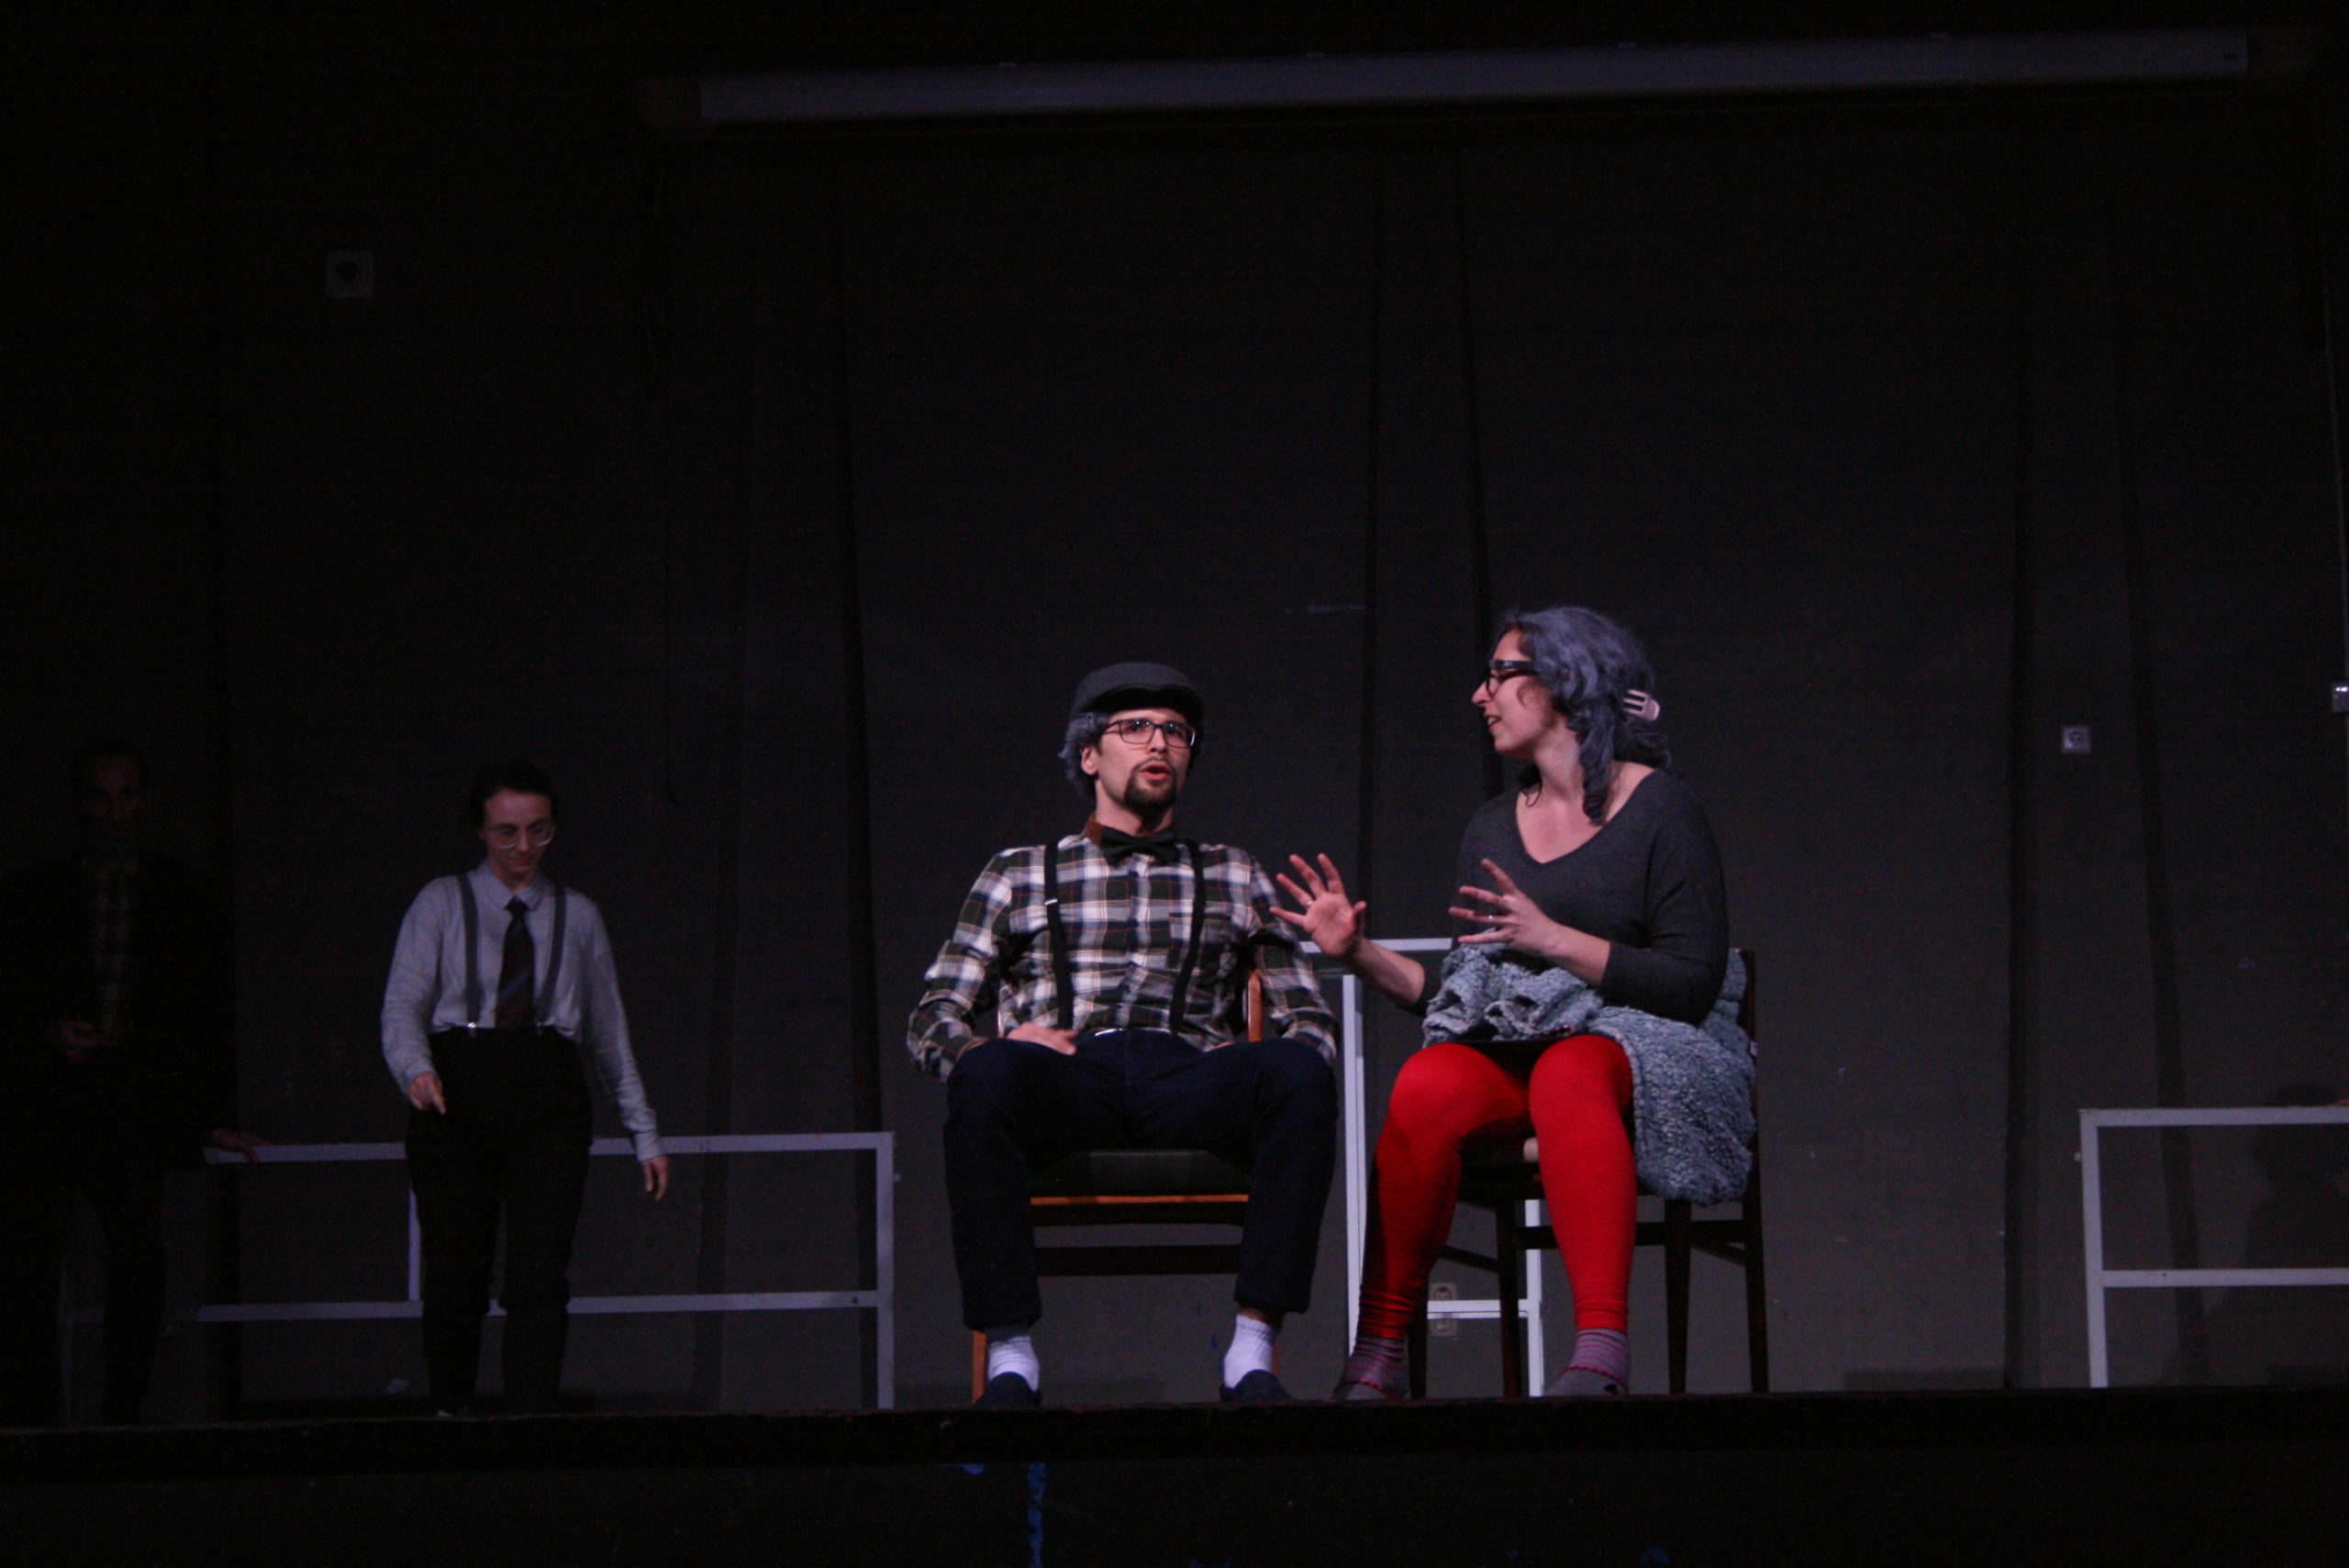 Photo from the show "The Chairs". A male and a female actor sit on chairs, talking. He looks over the audience and she looks at him, her arms open like holding a ball